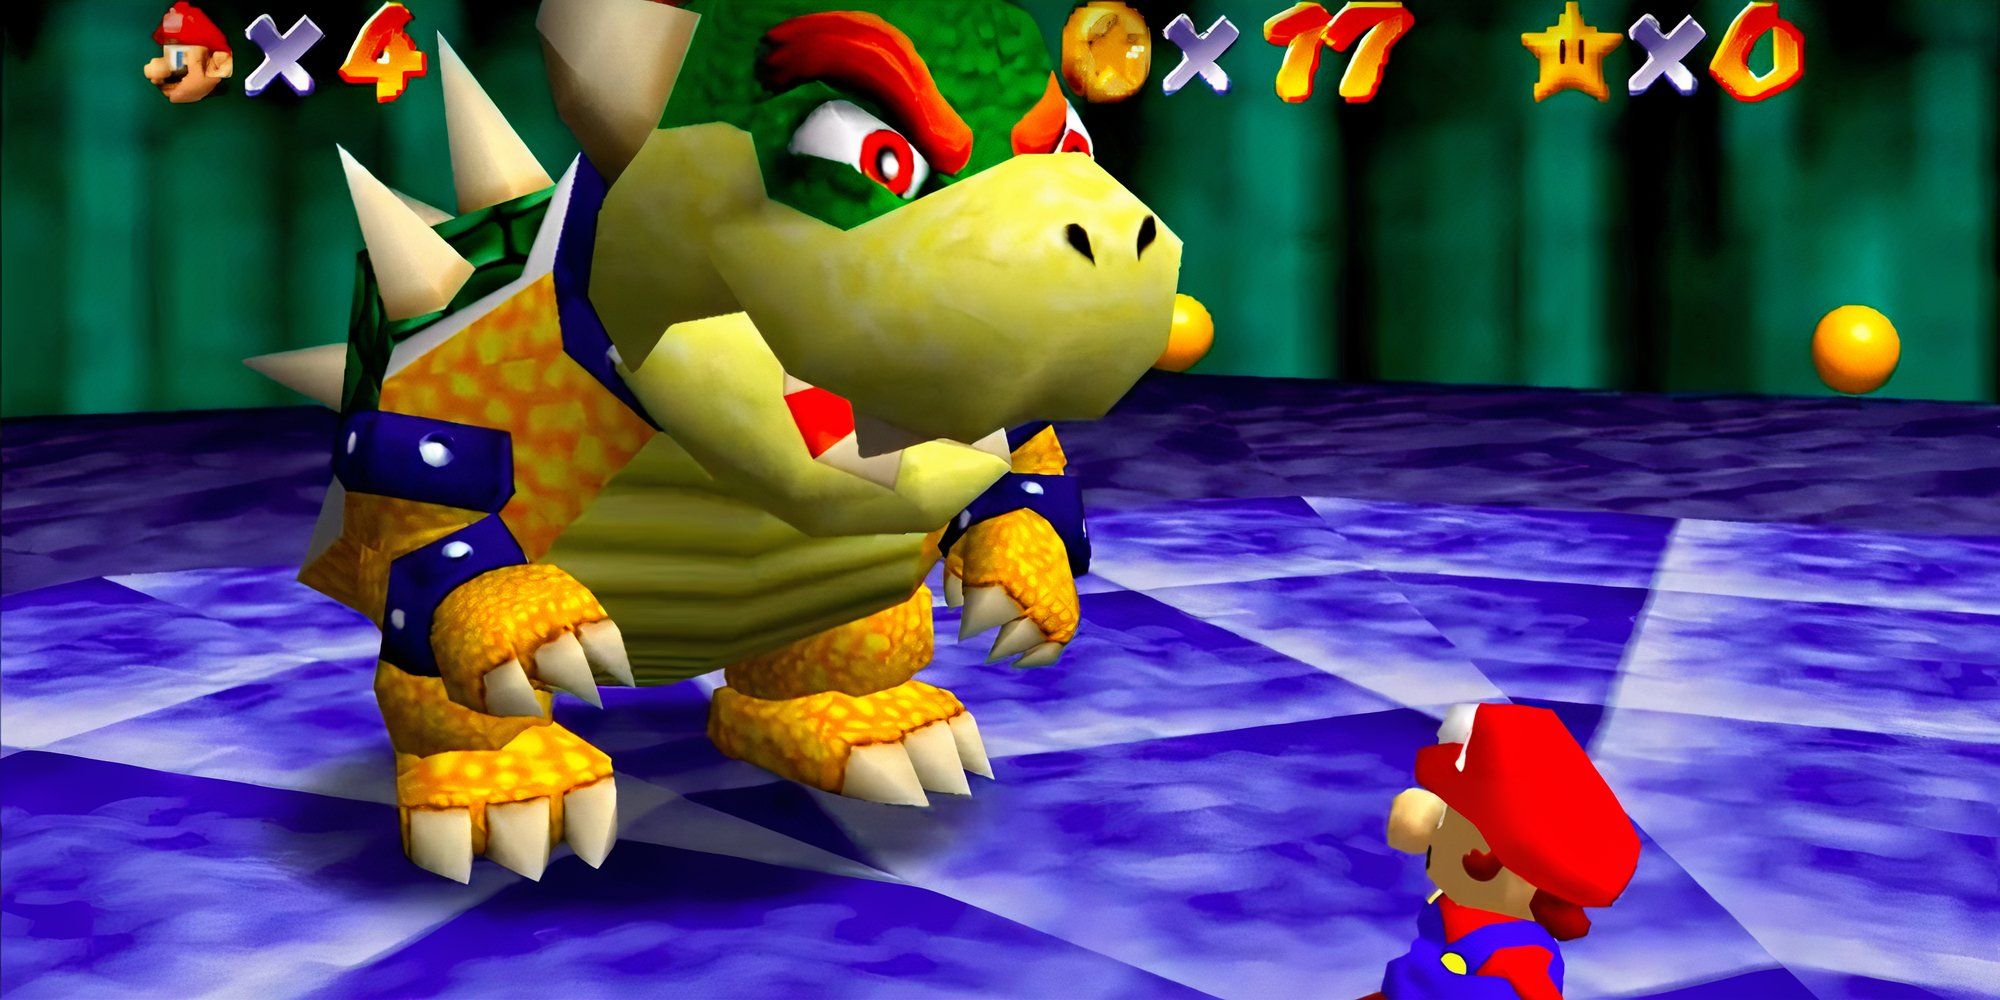 Fighting bowser in Super Mario 64